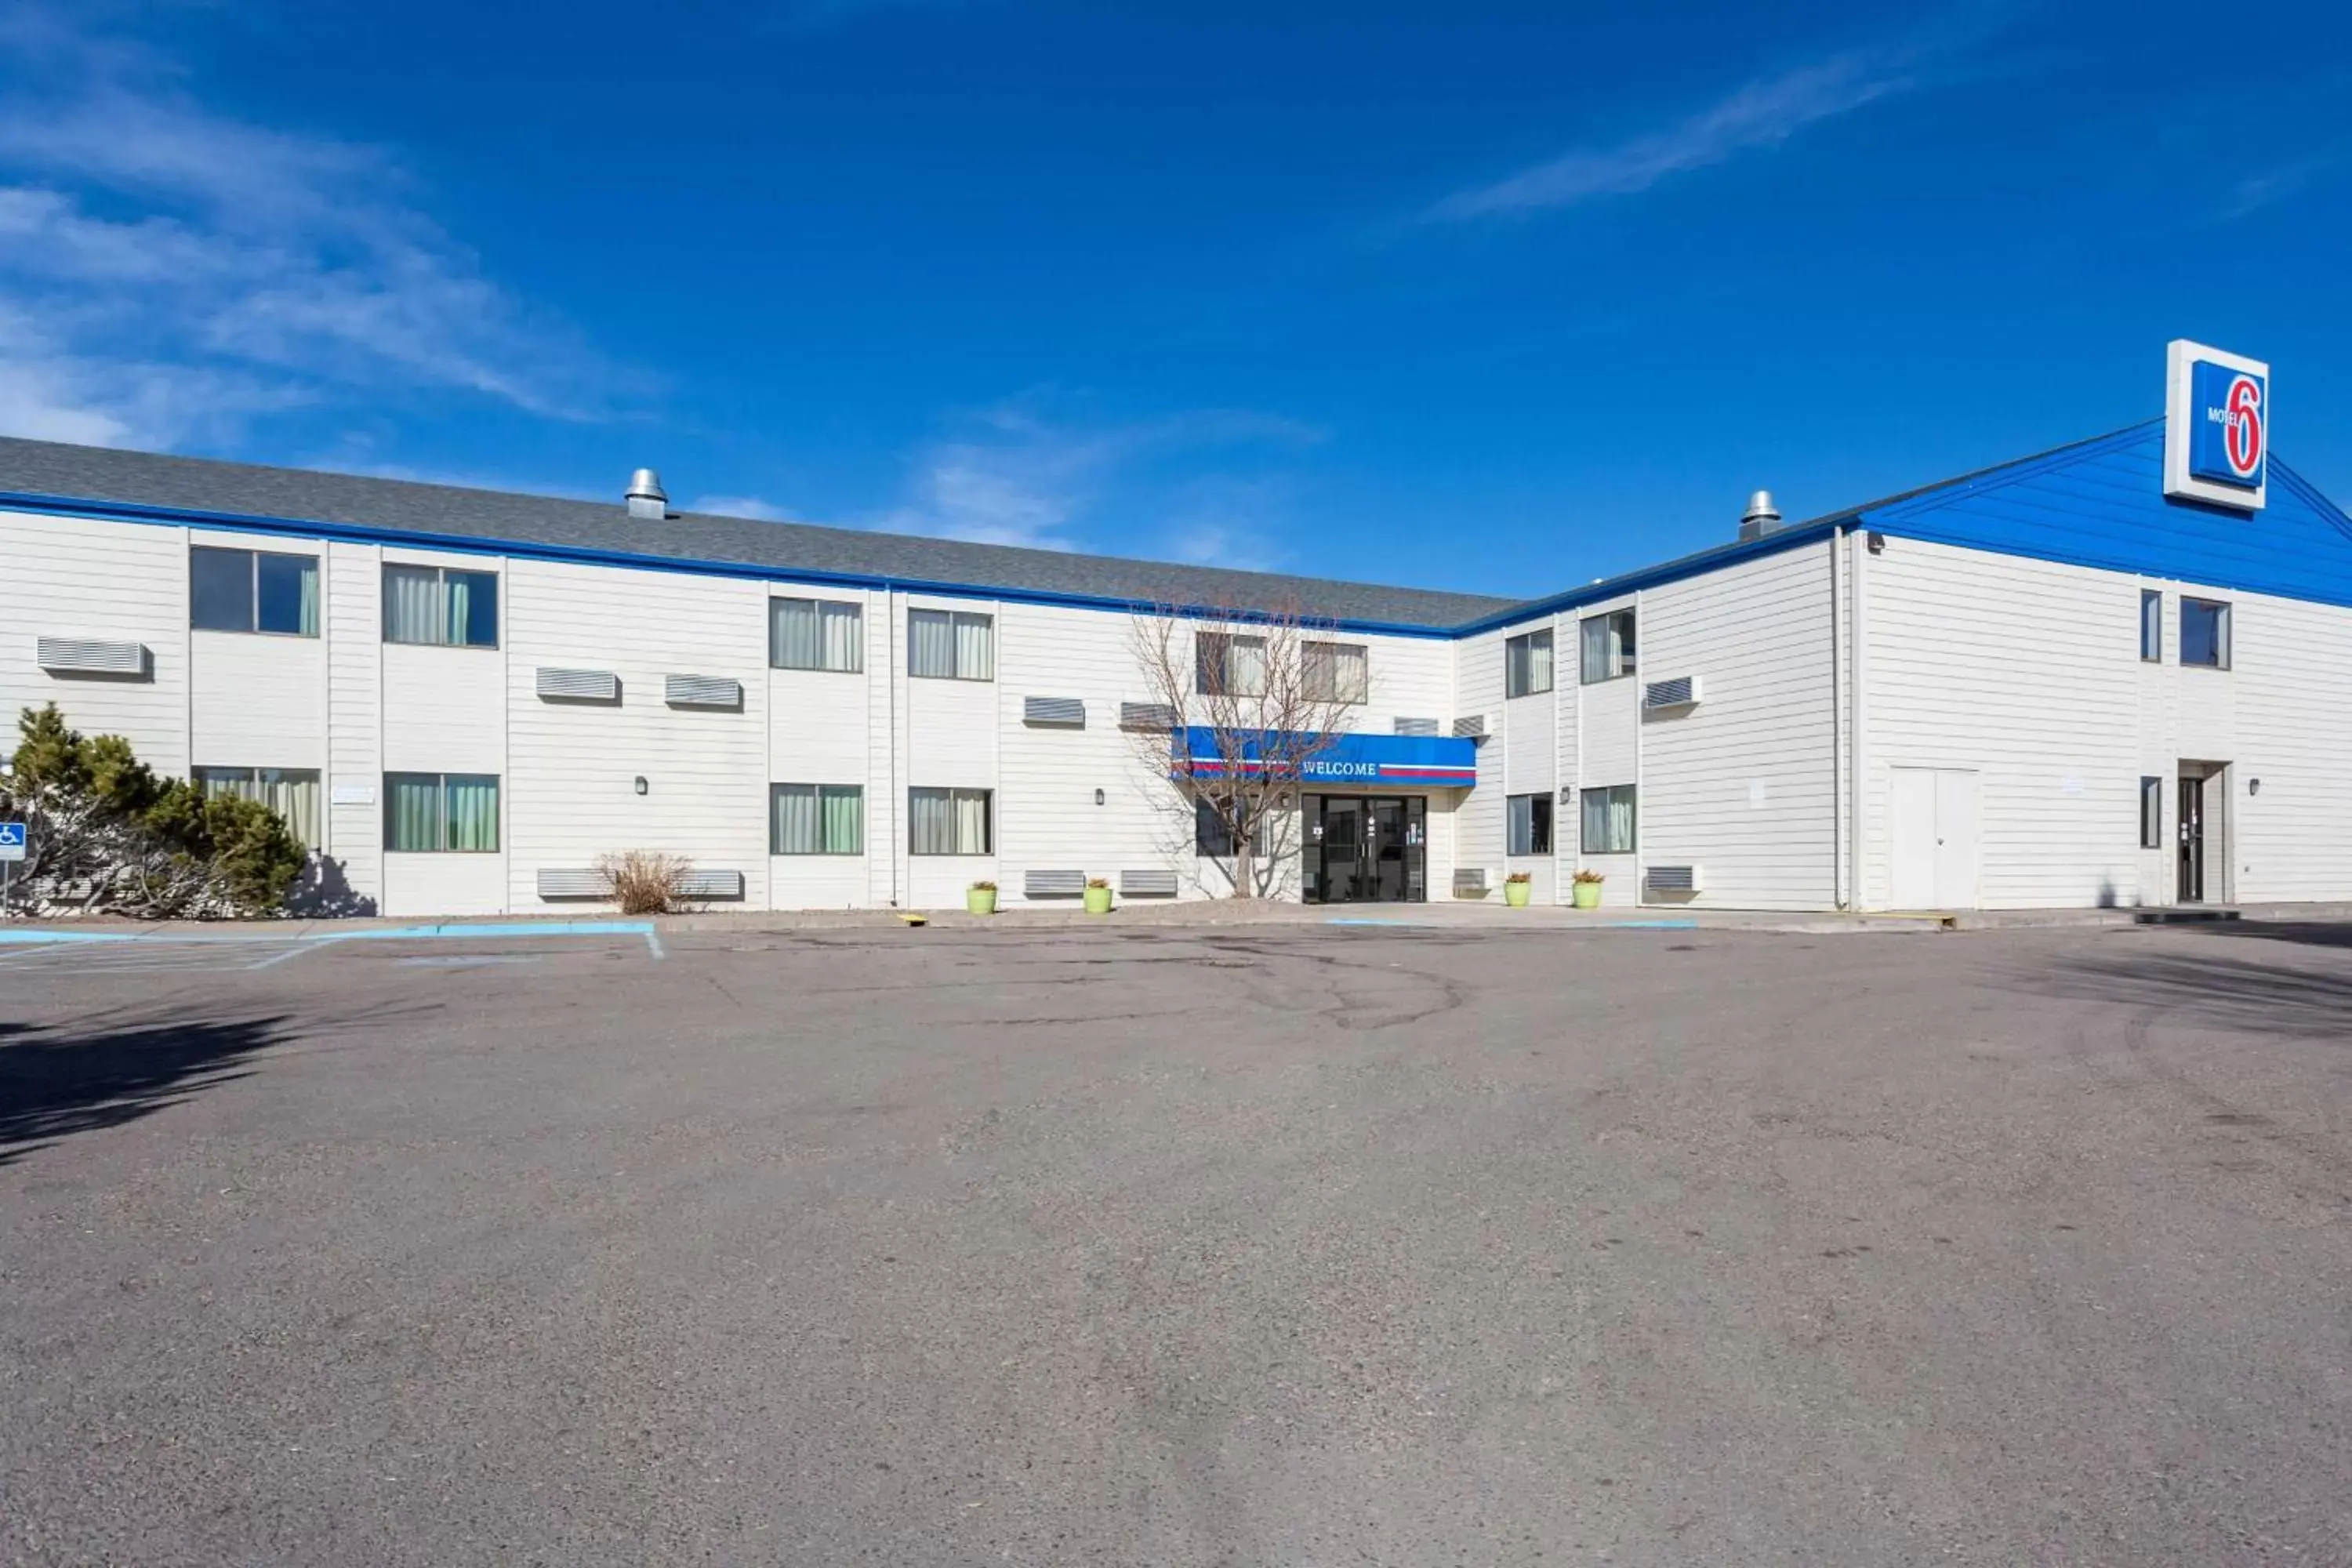 Property Building in Motel 6-Great Falls, MT